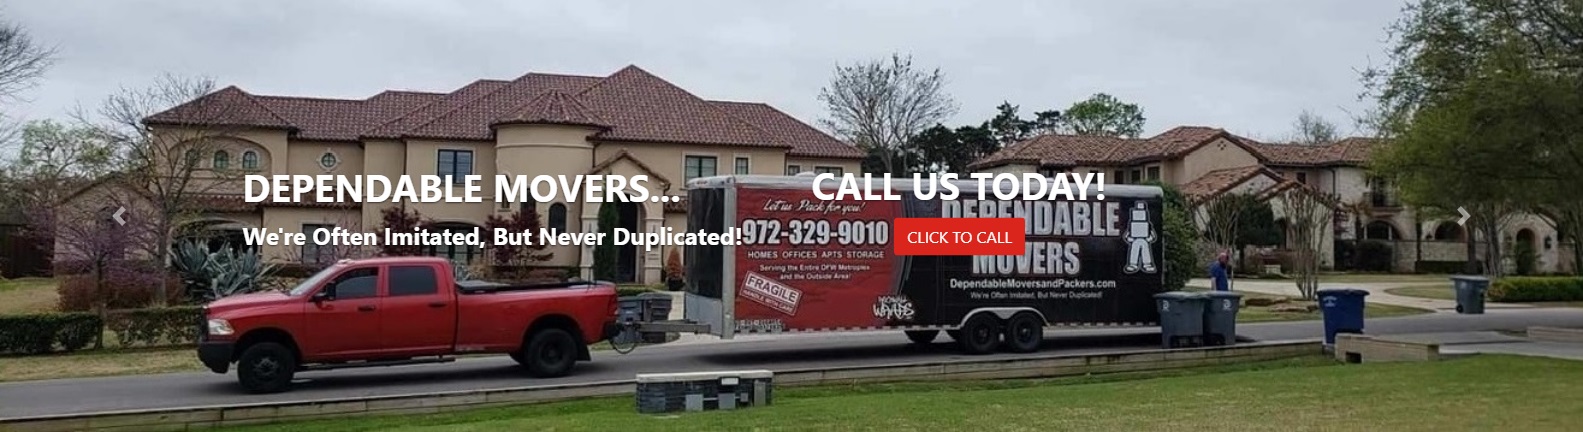 Dependable Movers Mesquite Mover Mesquite Moving Company - Home Office Apartment Movers Residential Commercial Movers in Mesquite Texas